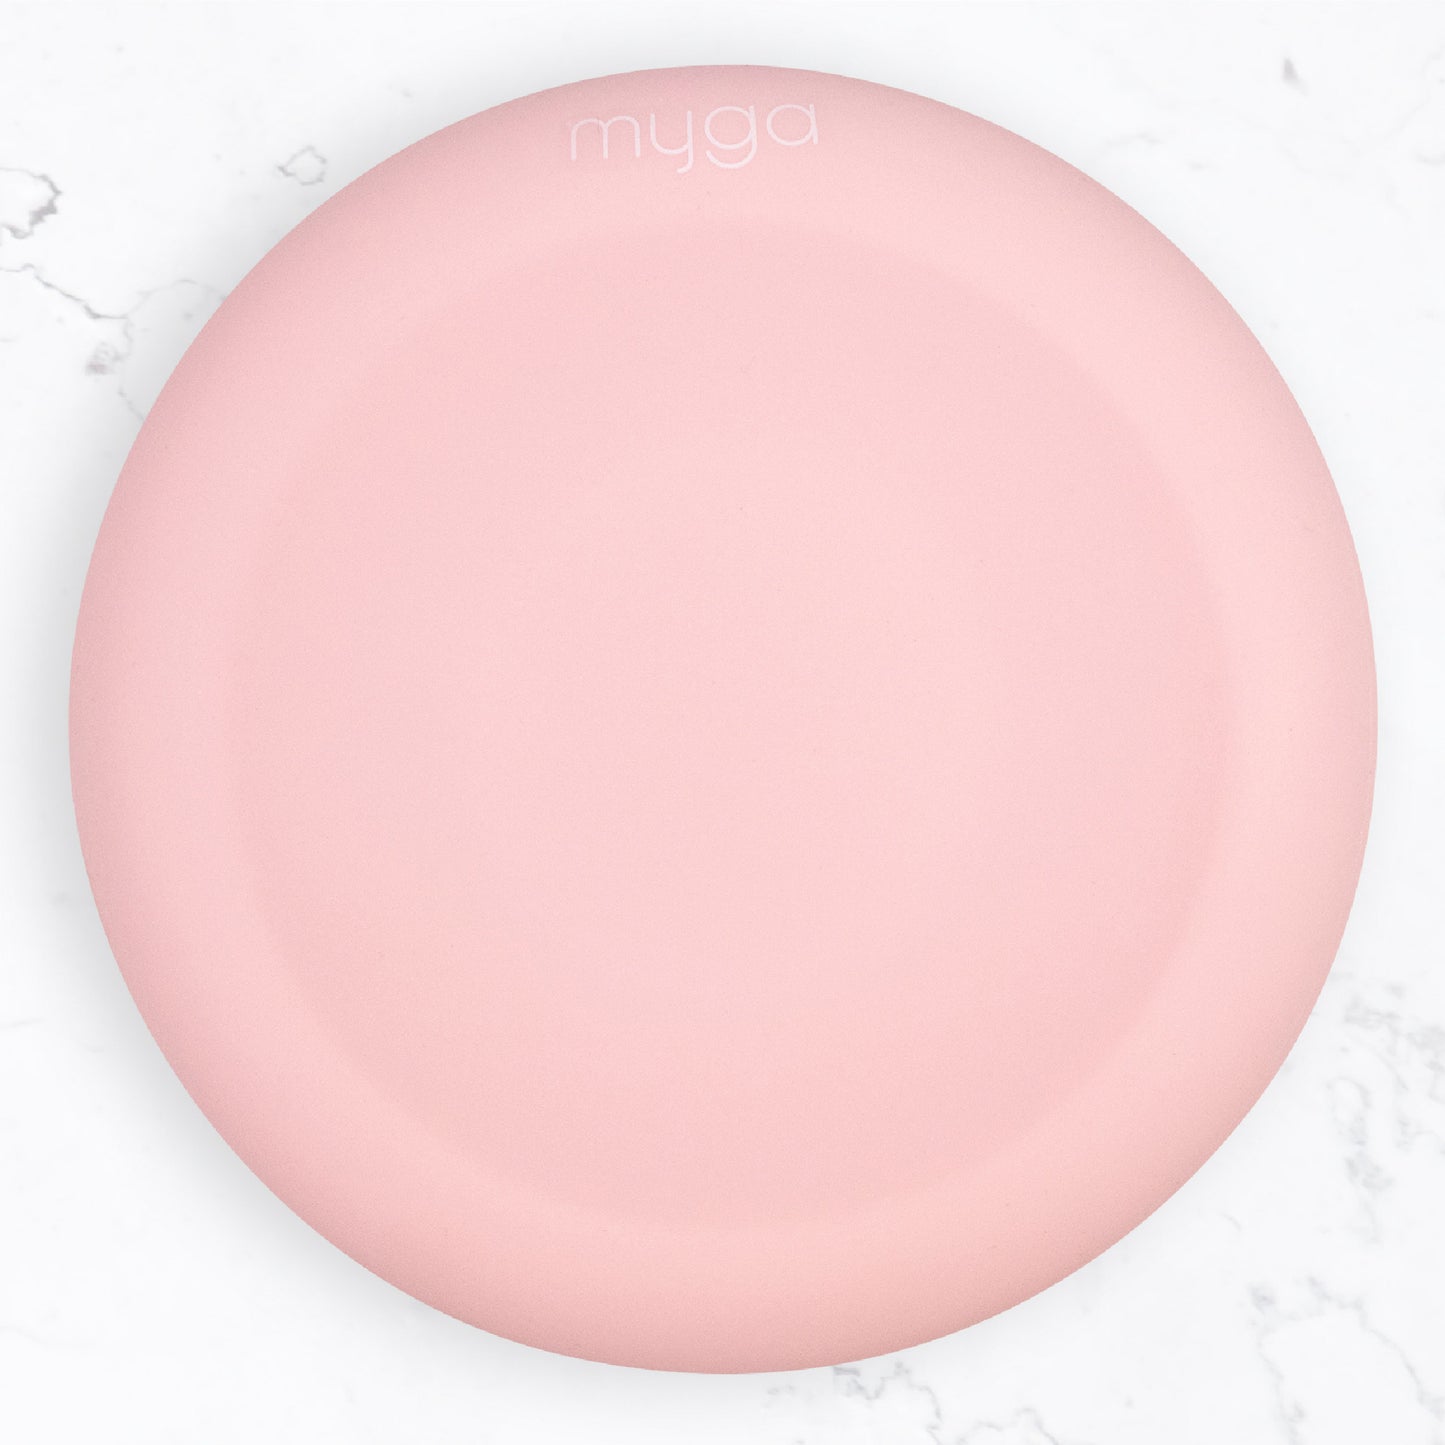 Yoga Support Jelly Pad - Pink